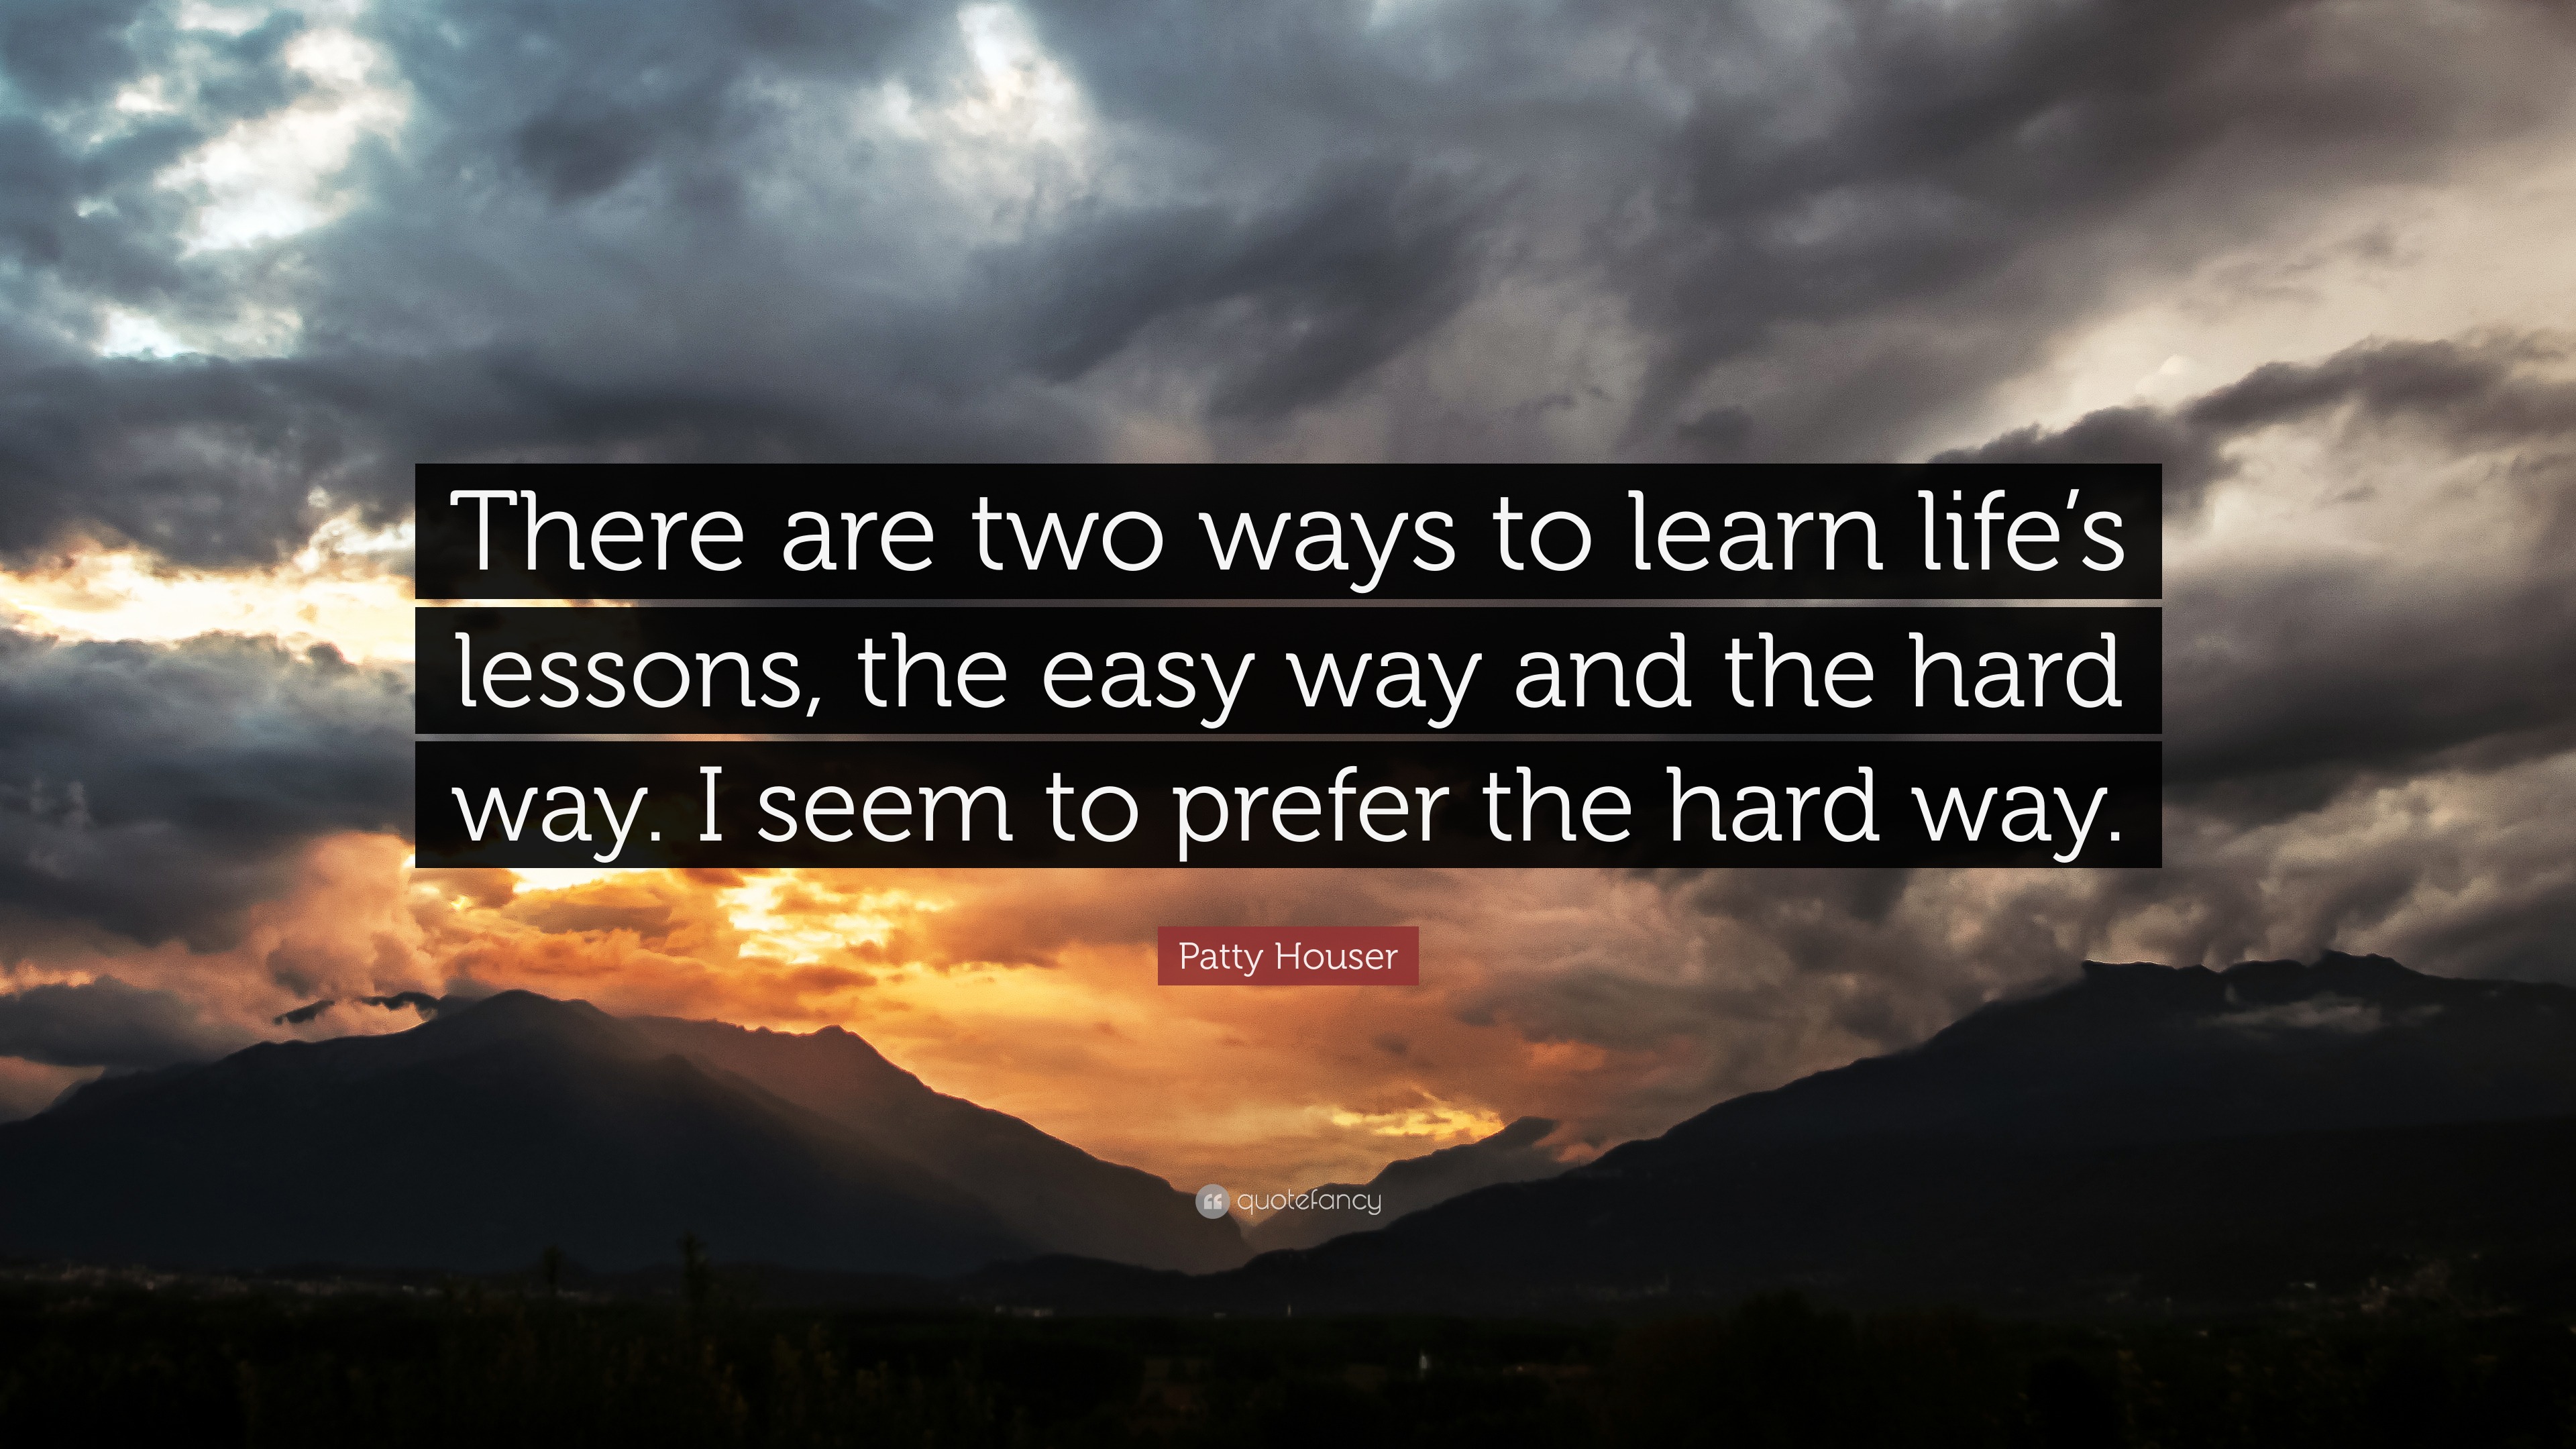 Patty Houser Quote: “There are two ways to learn life's lessons, the easy  way and the hard way. I seem to prefer the hard way.”